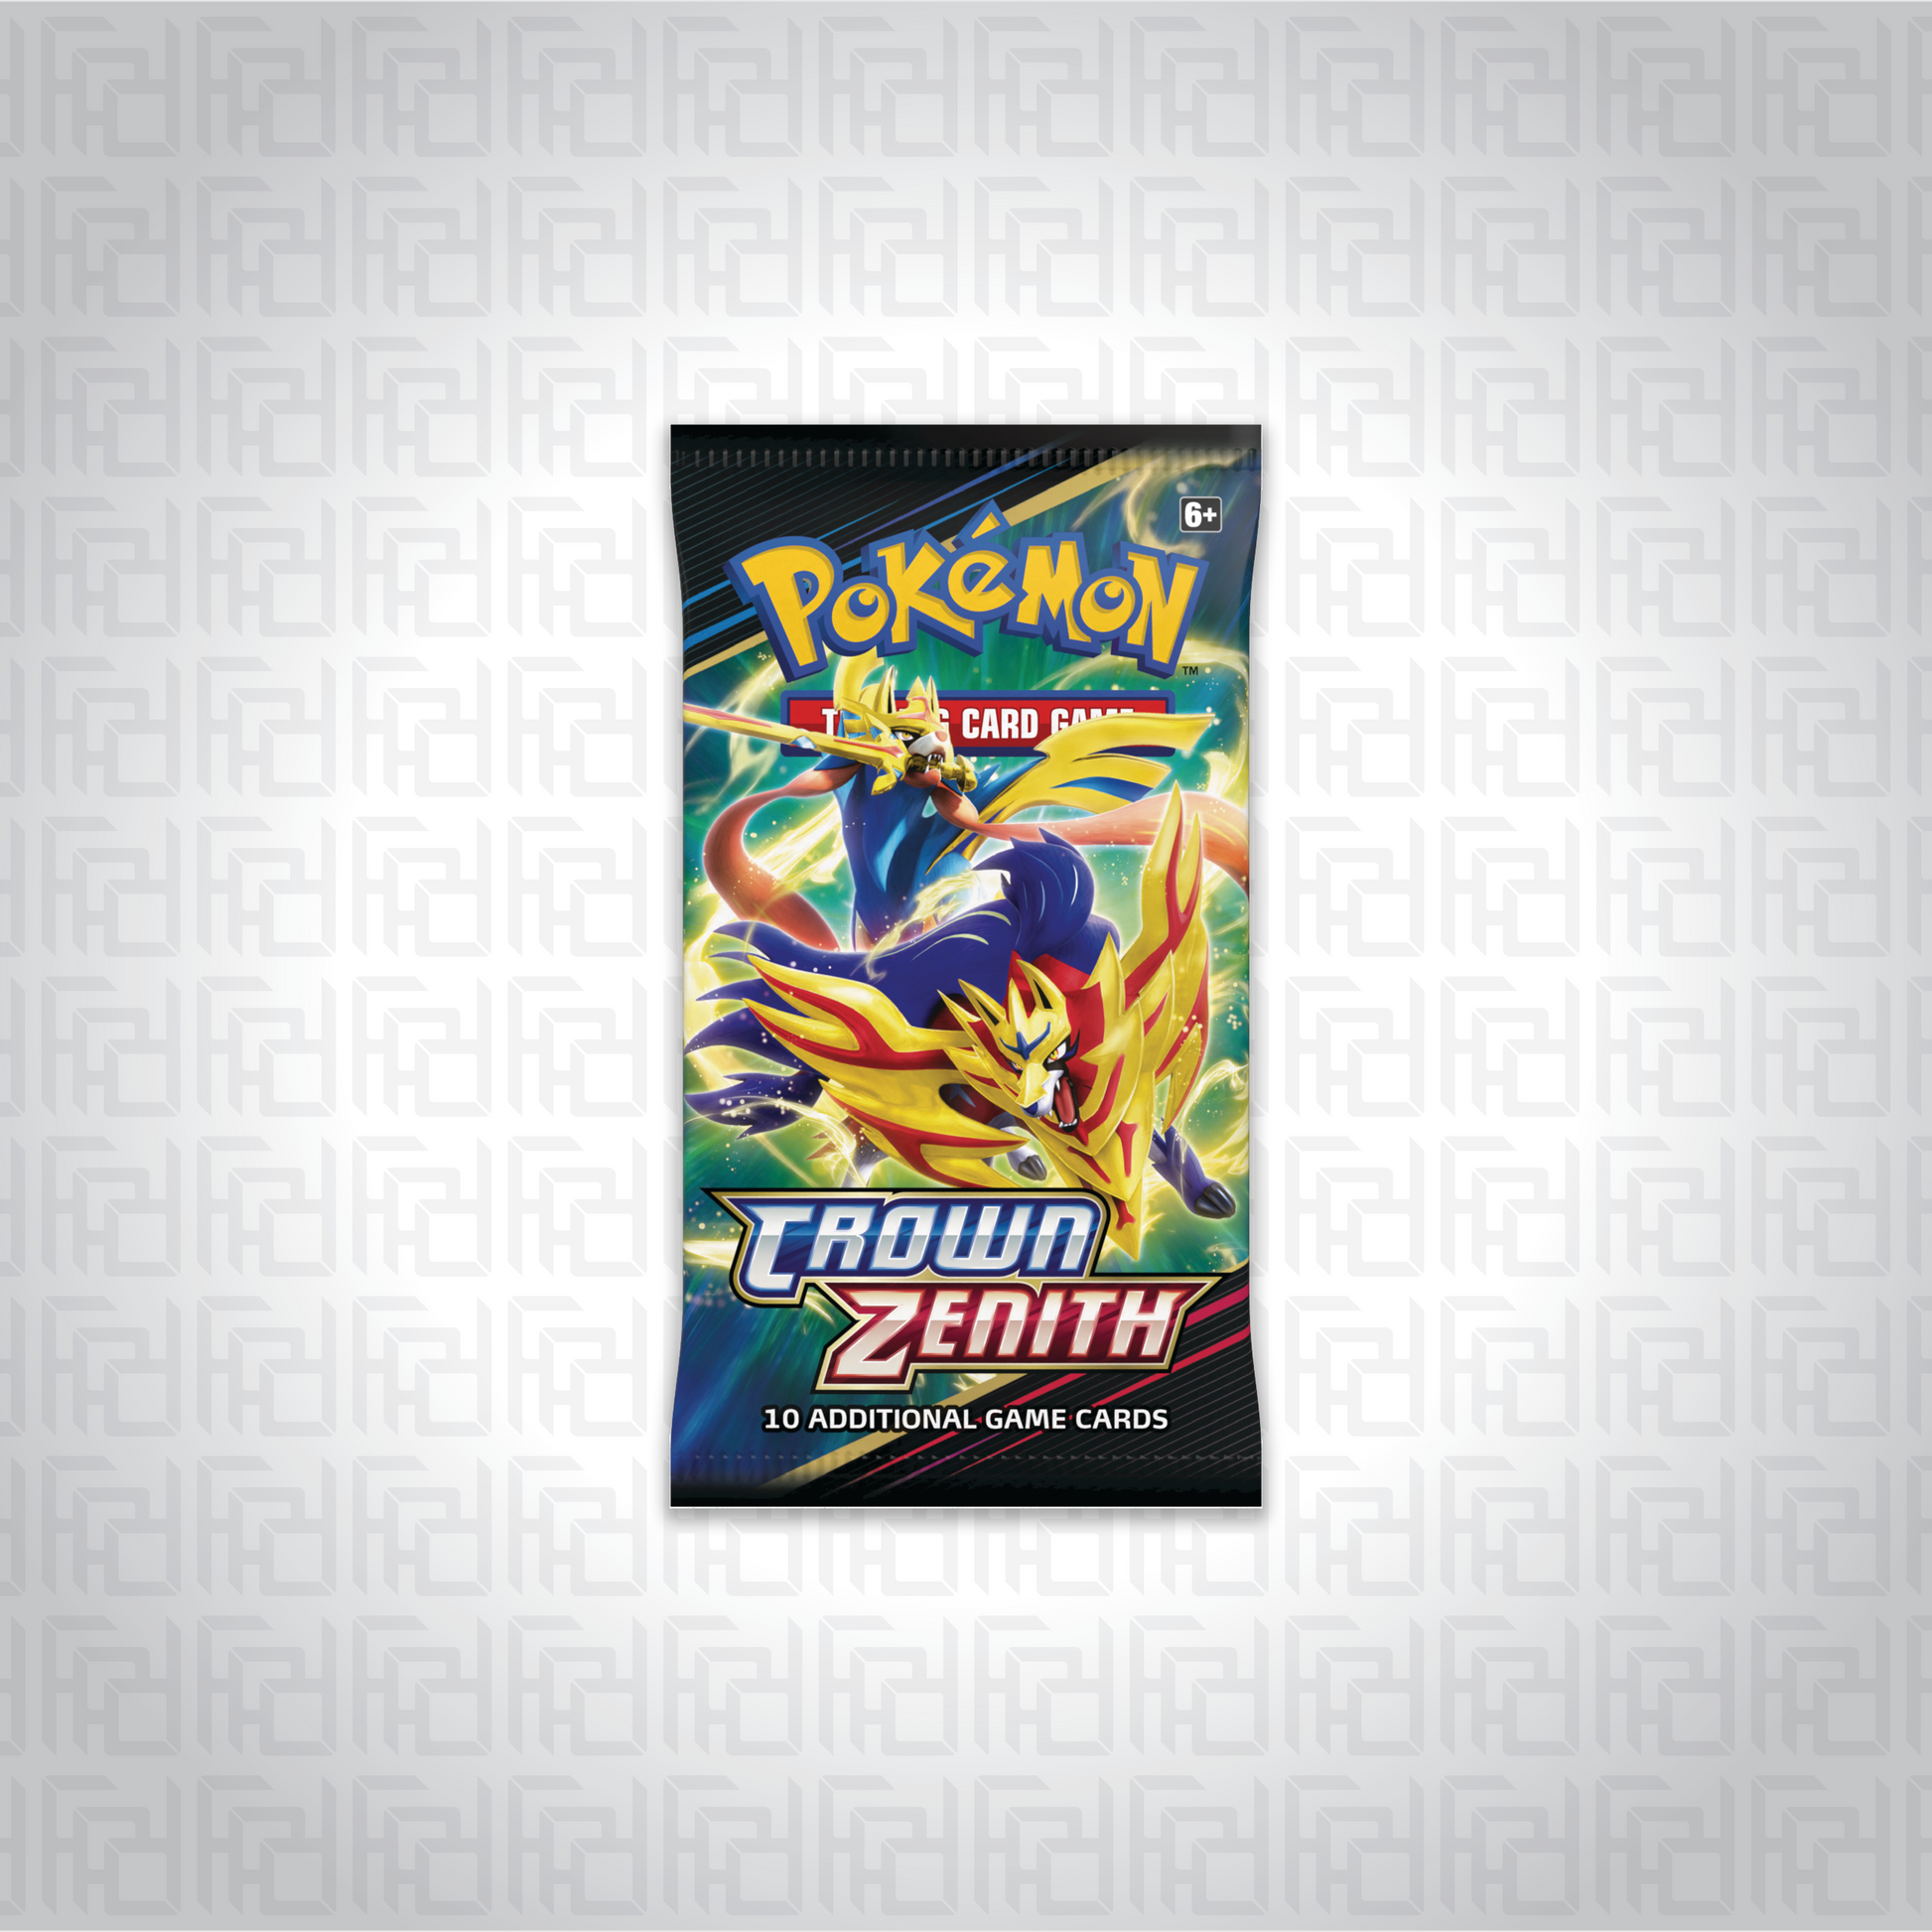 Pokemon Trading Card Game booster pack of Crown Zenith expansion.